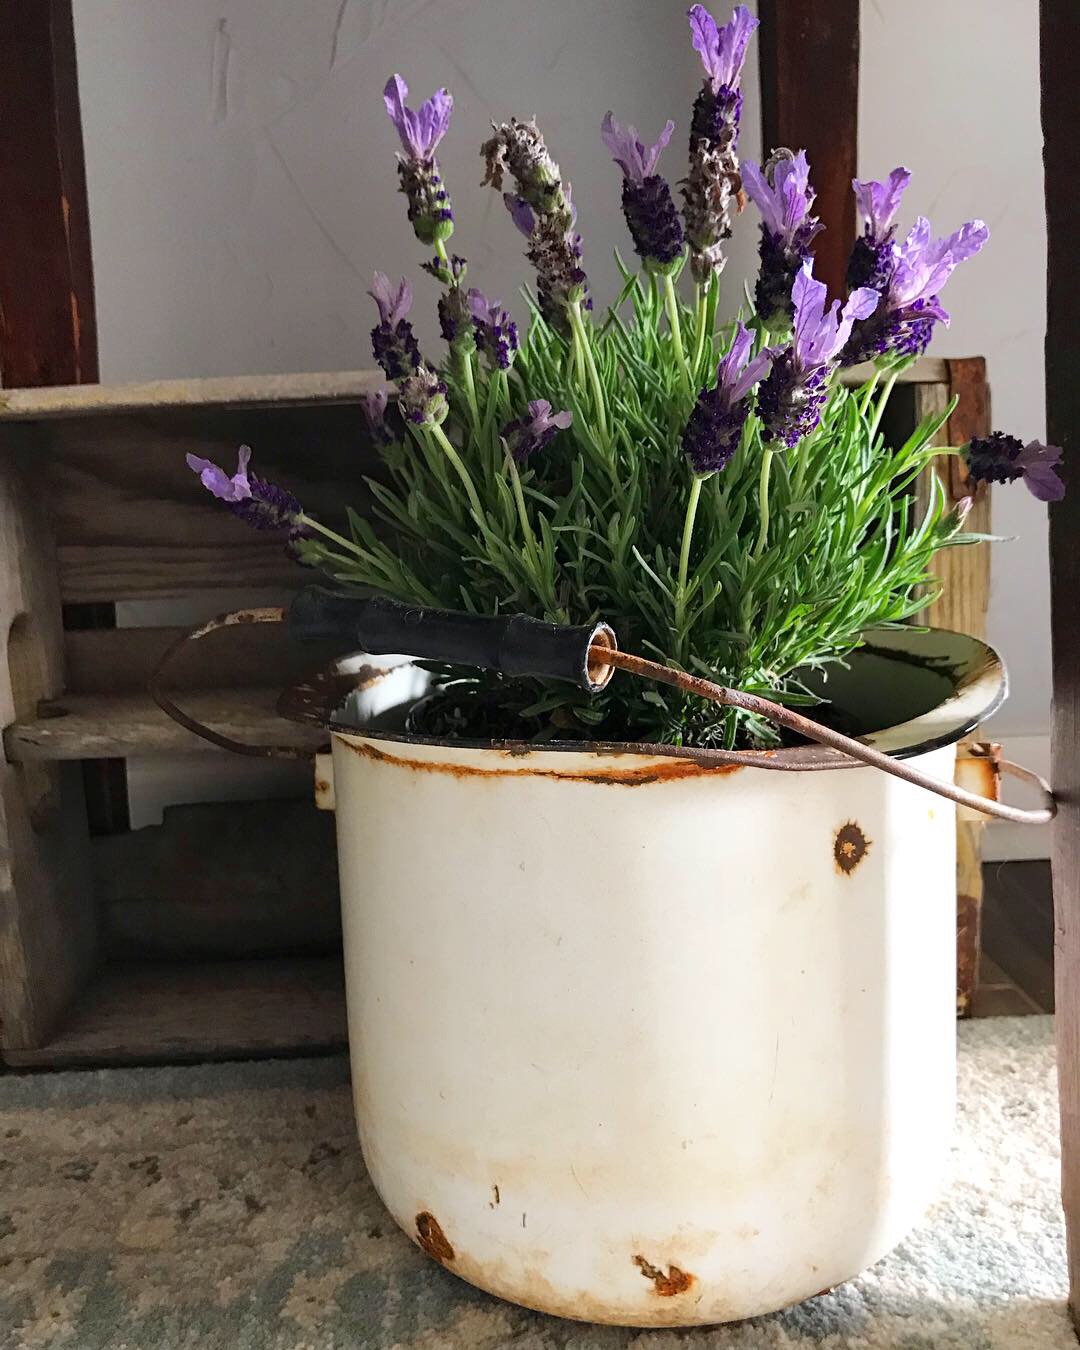 Clover House: The Benefits and Joy of Lavender